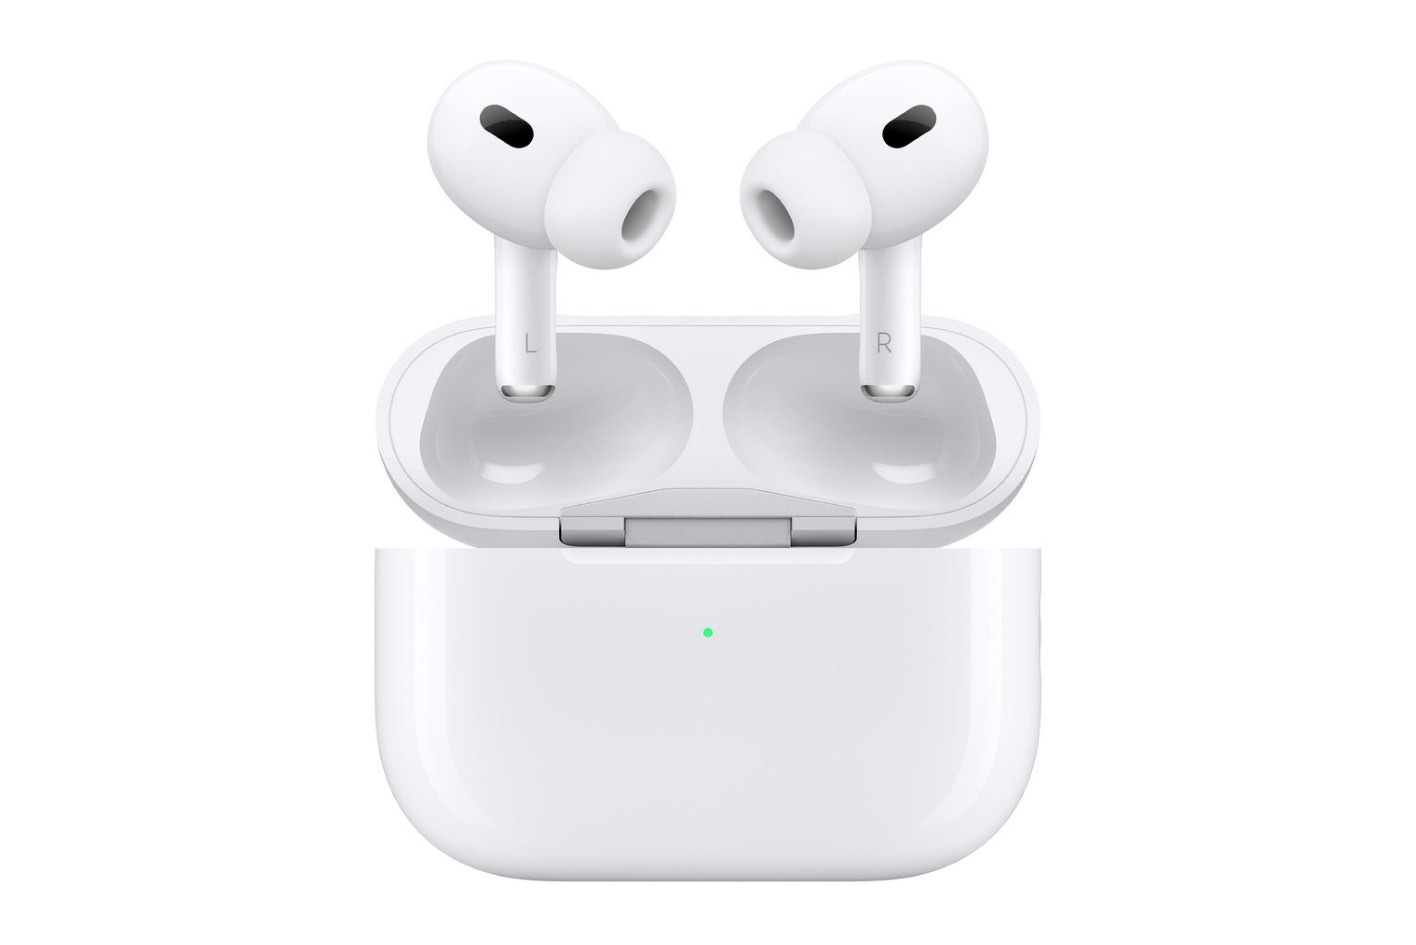 A photo of AirPods